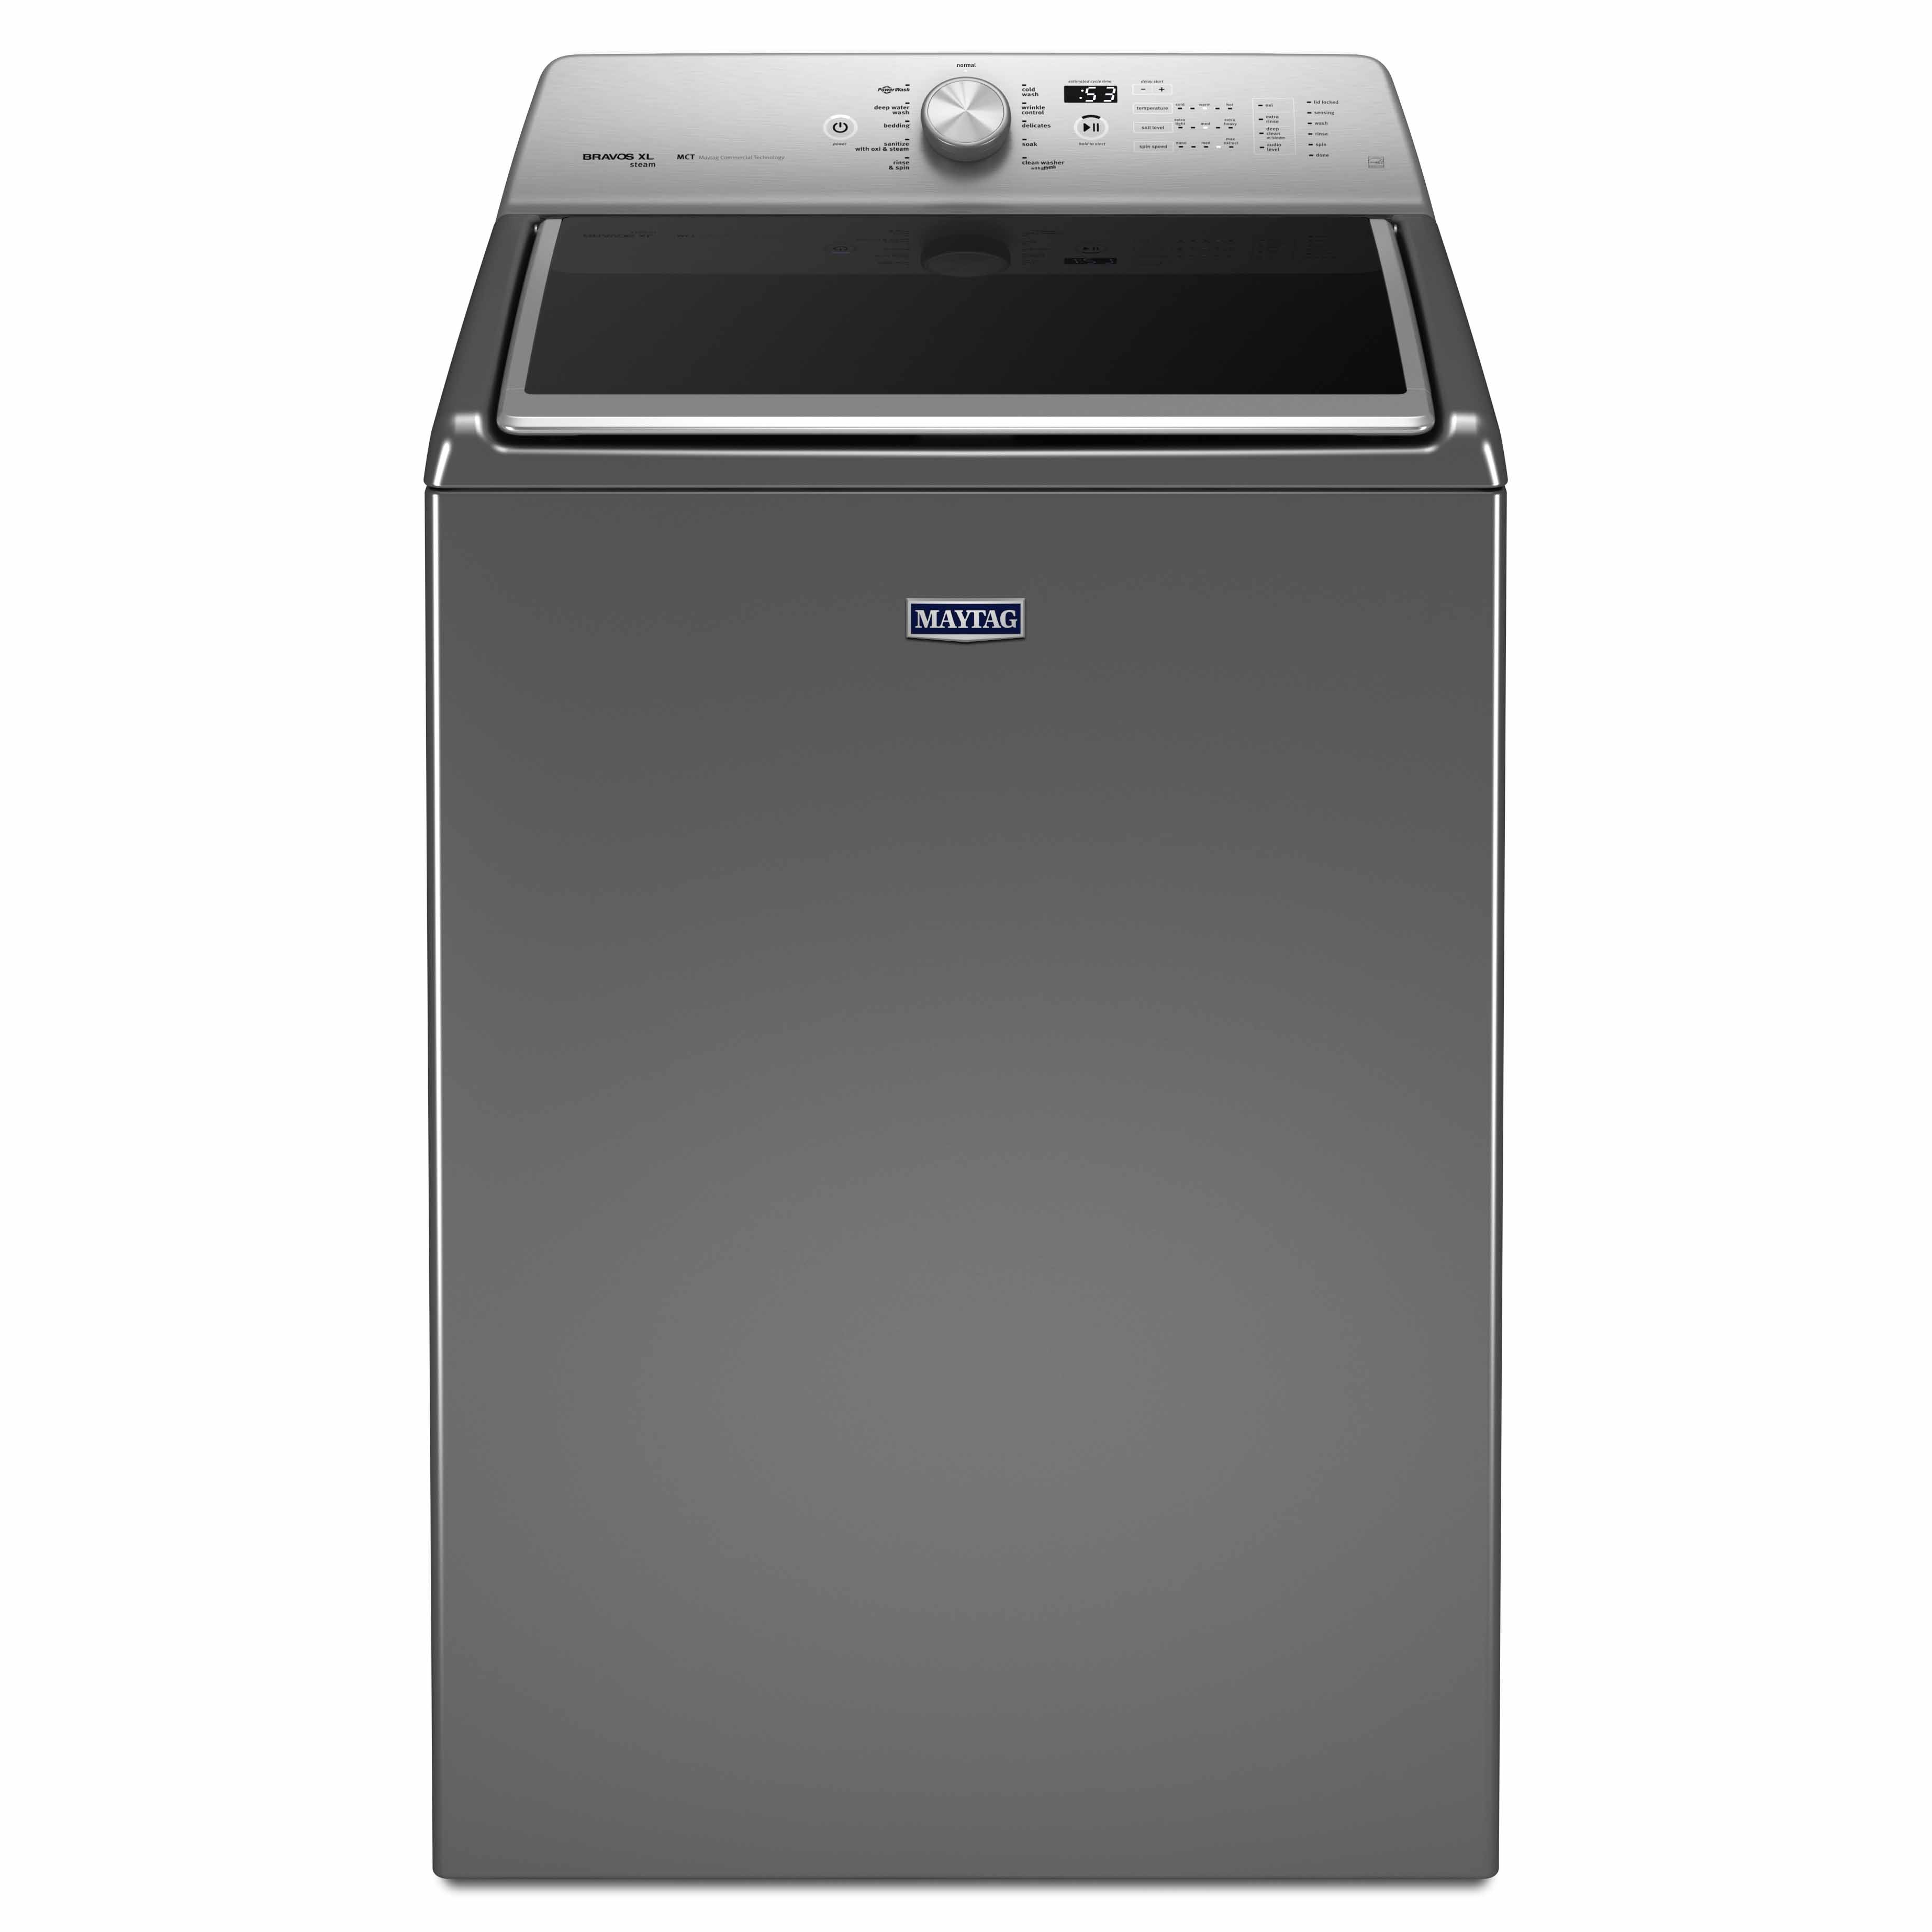 maytag-mvwb855dc-5-3-cu-ft-top-load-washer-slate-shop-your-way